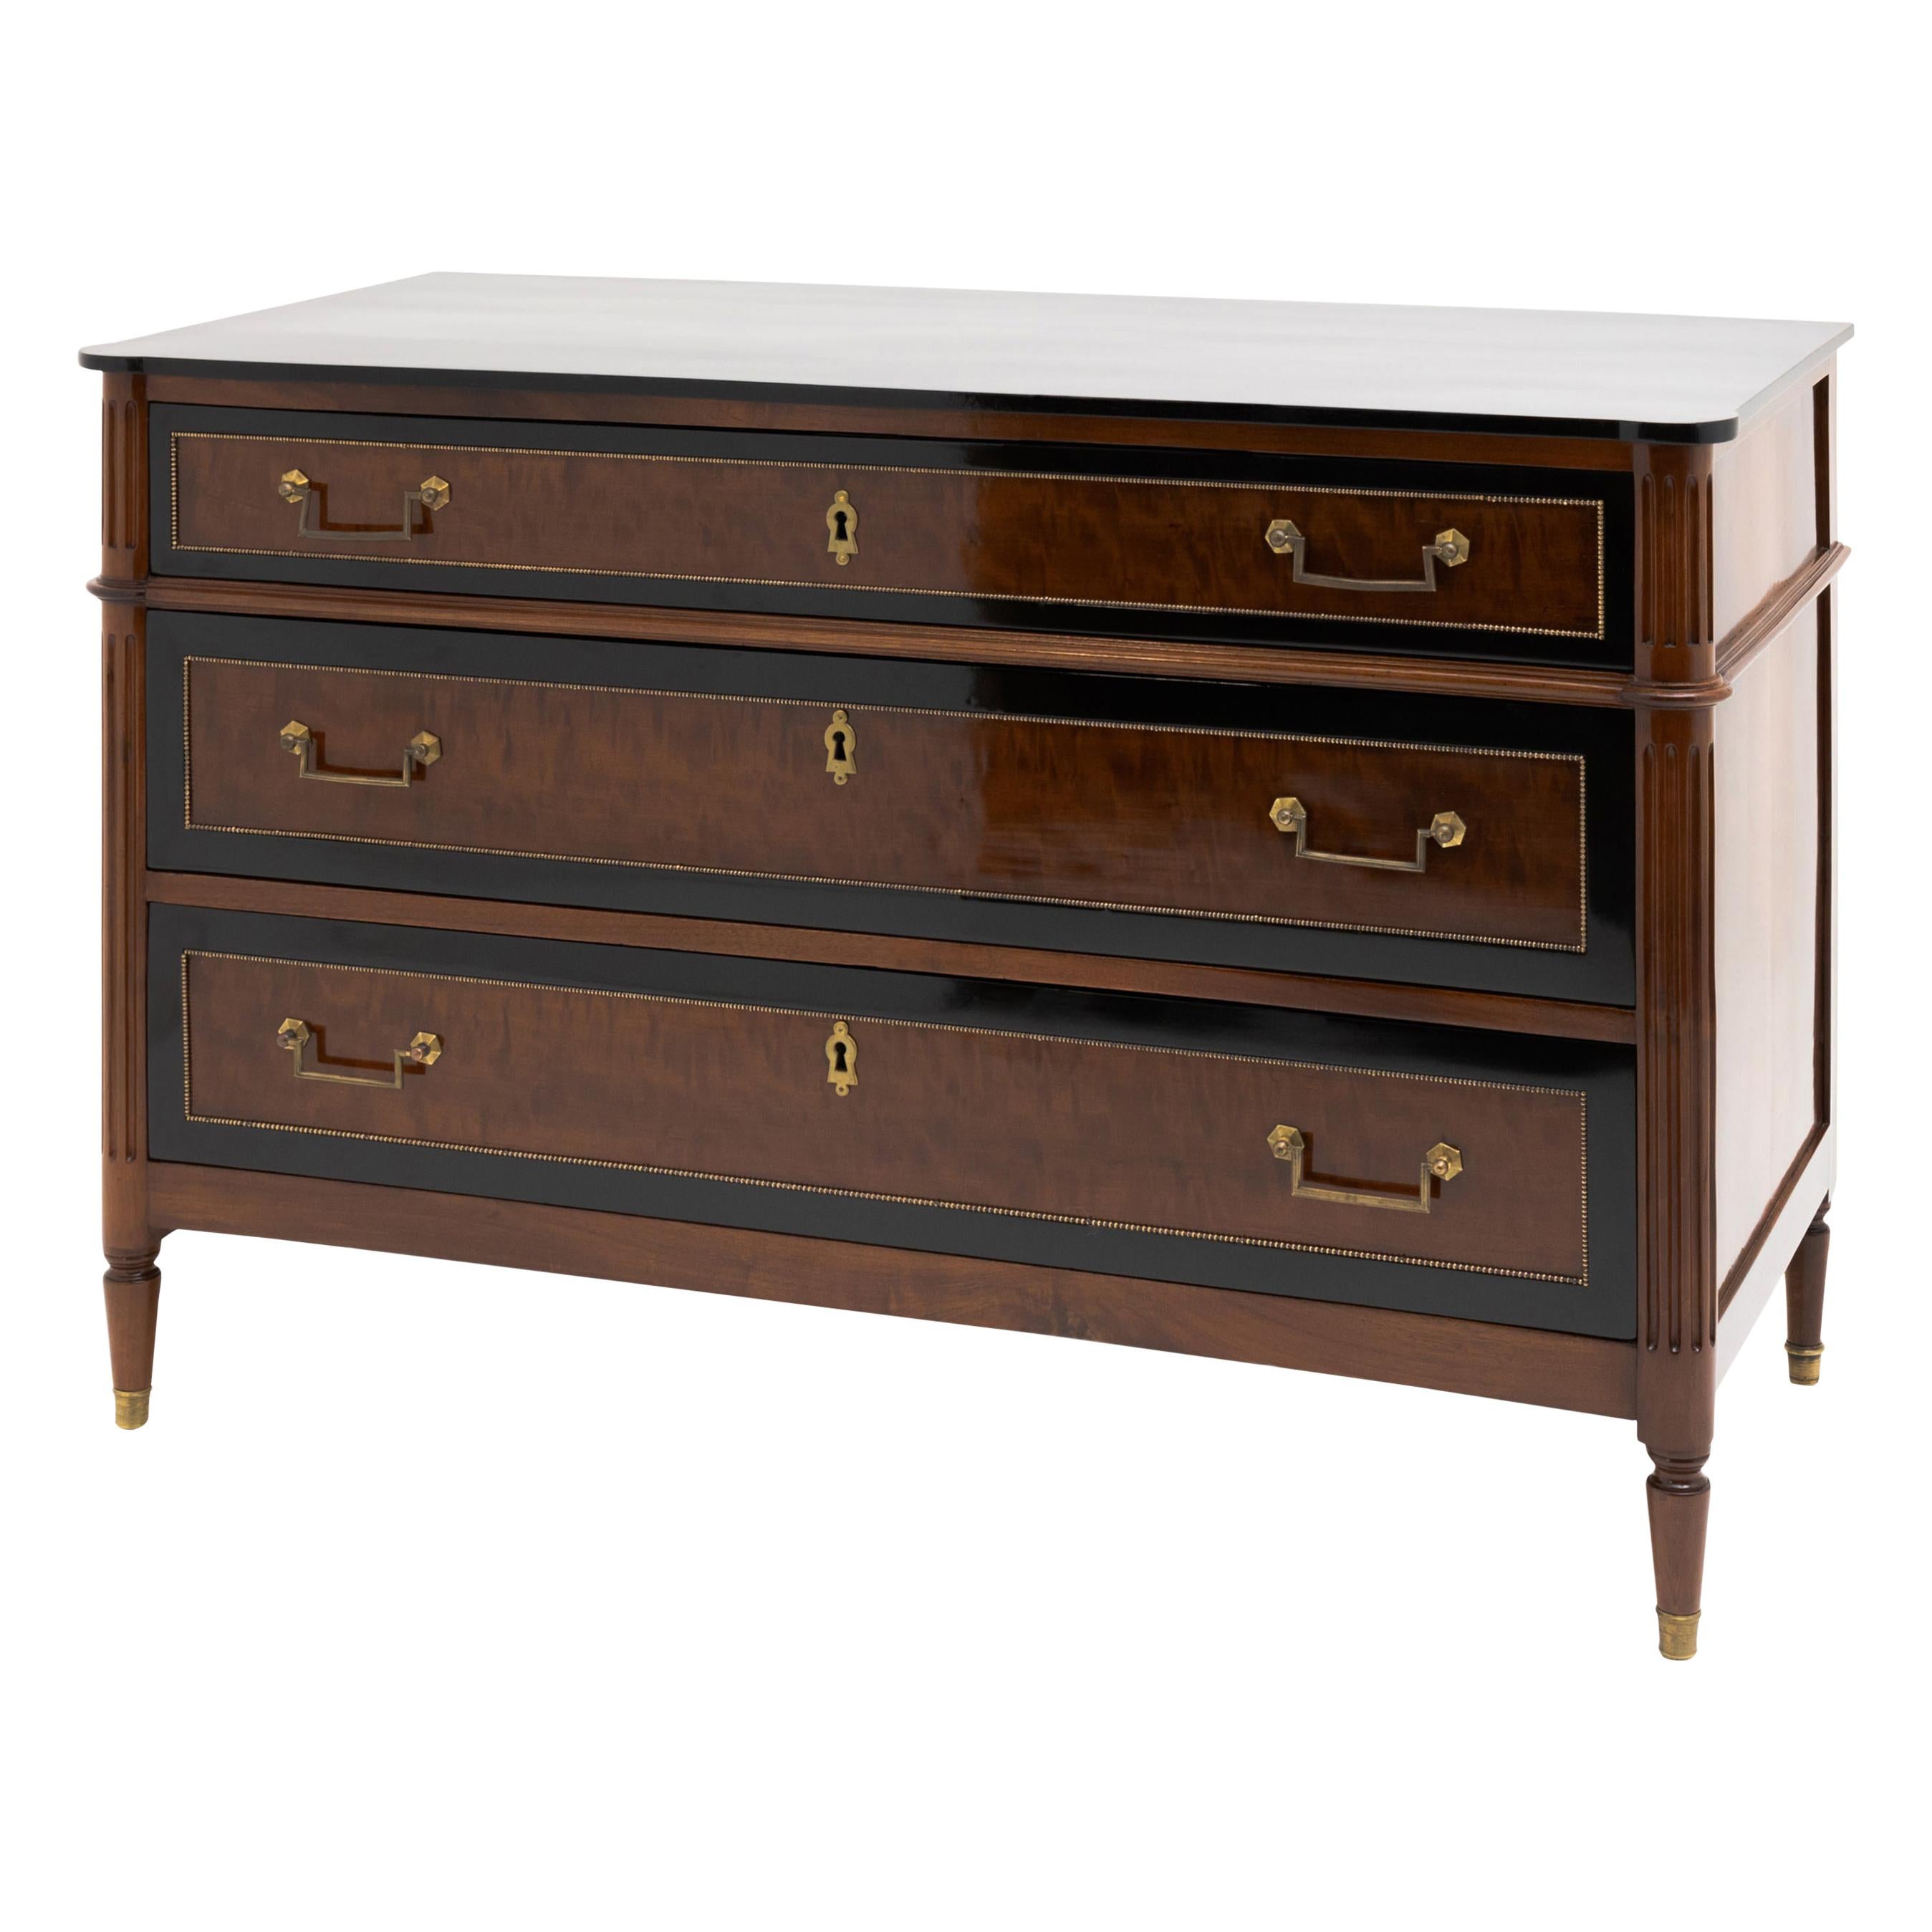 Directoire Chest of Drawers, Mahogany, France, circa 1790